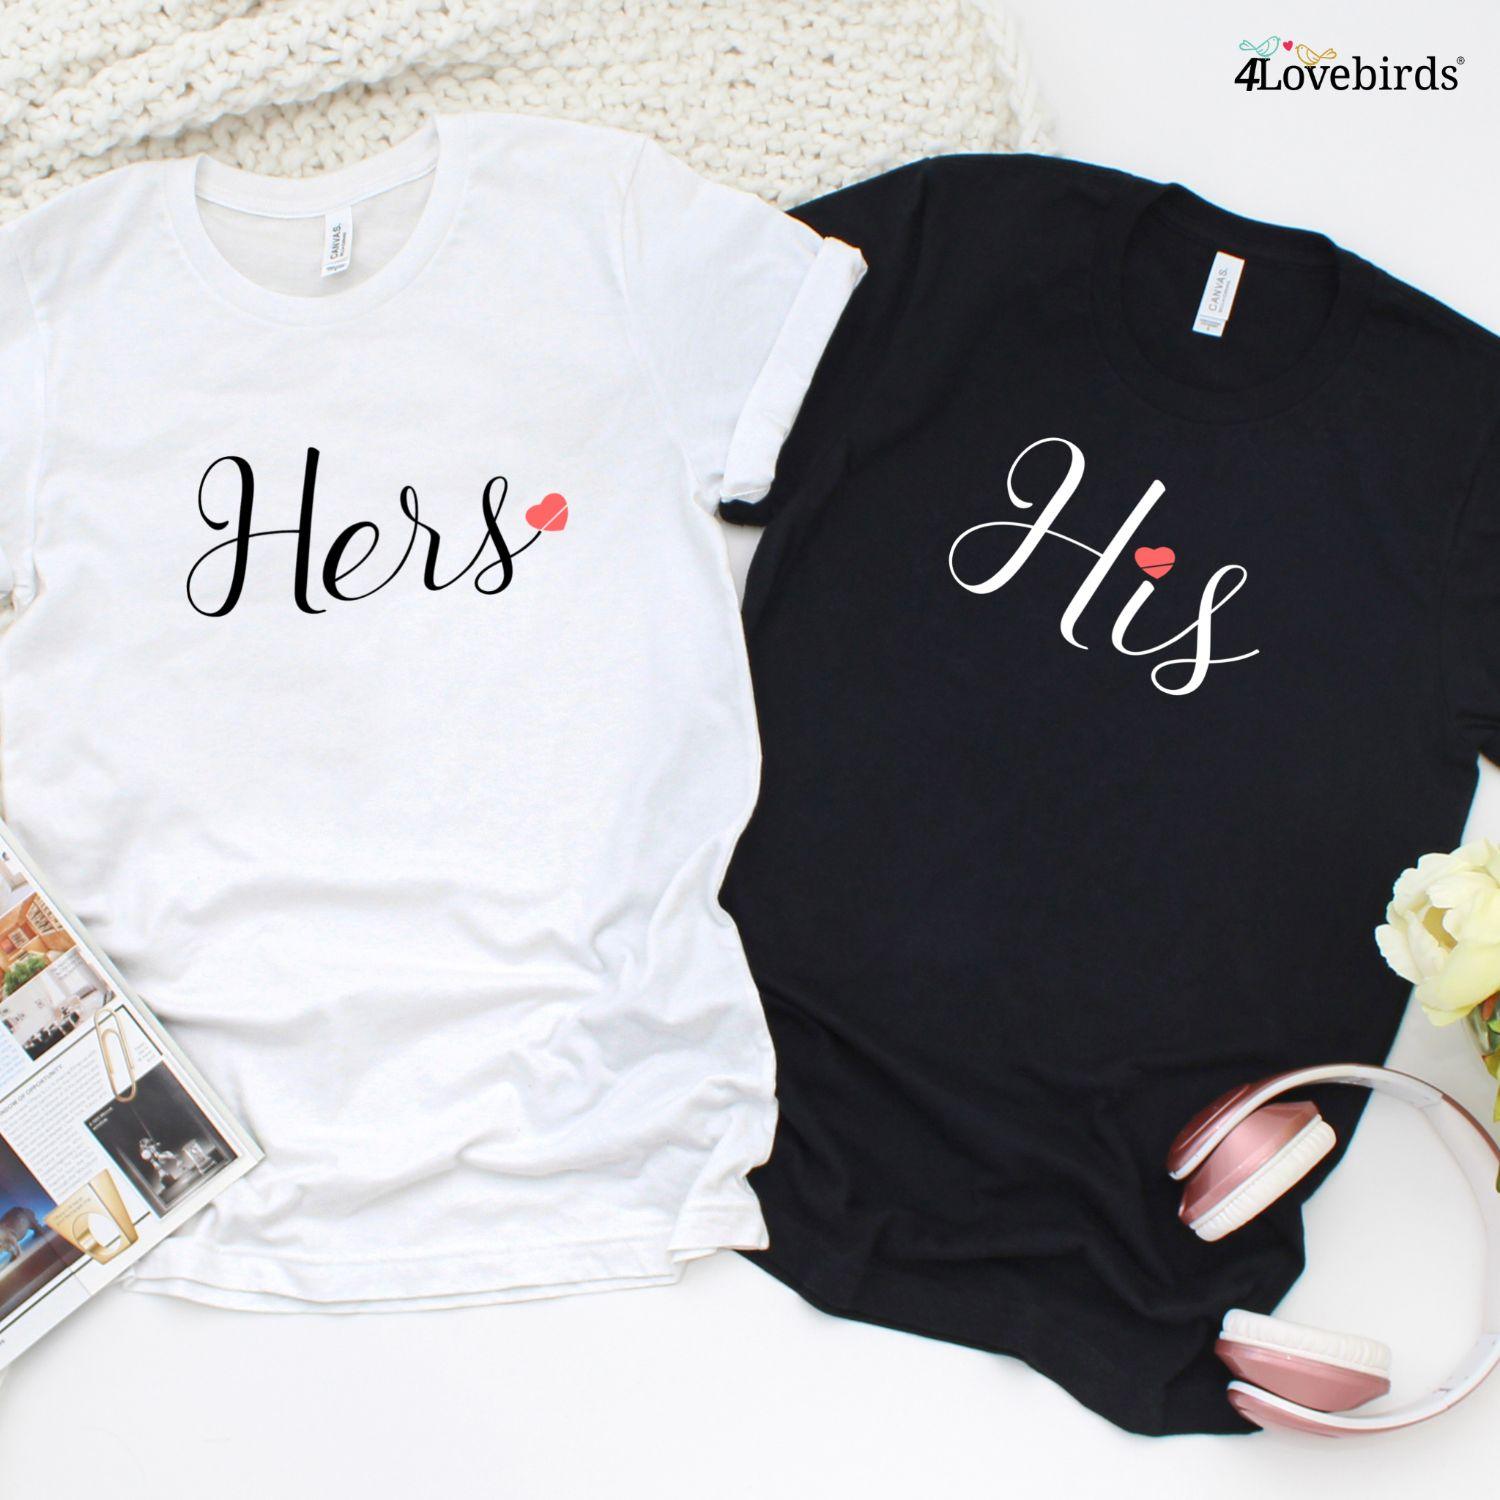 Valentine's Day Matching Sets: His & Hers Hoodies & Sweatshirts for Couples! - 4Lovebirds